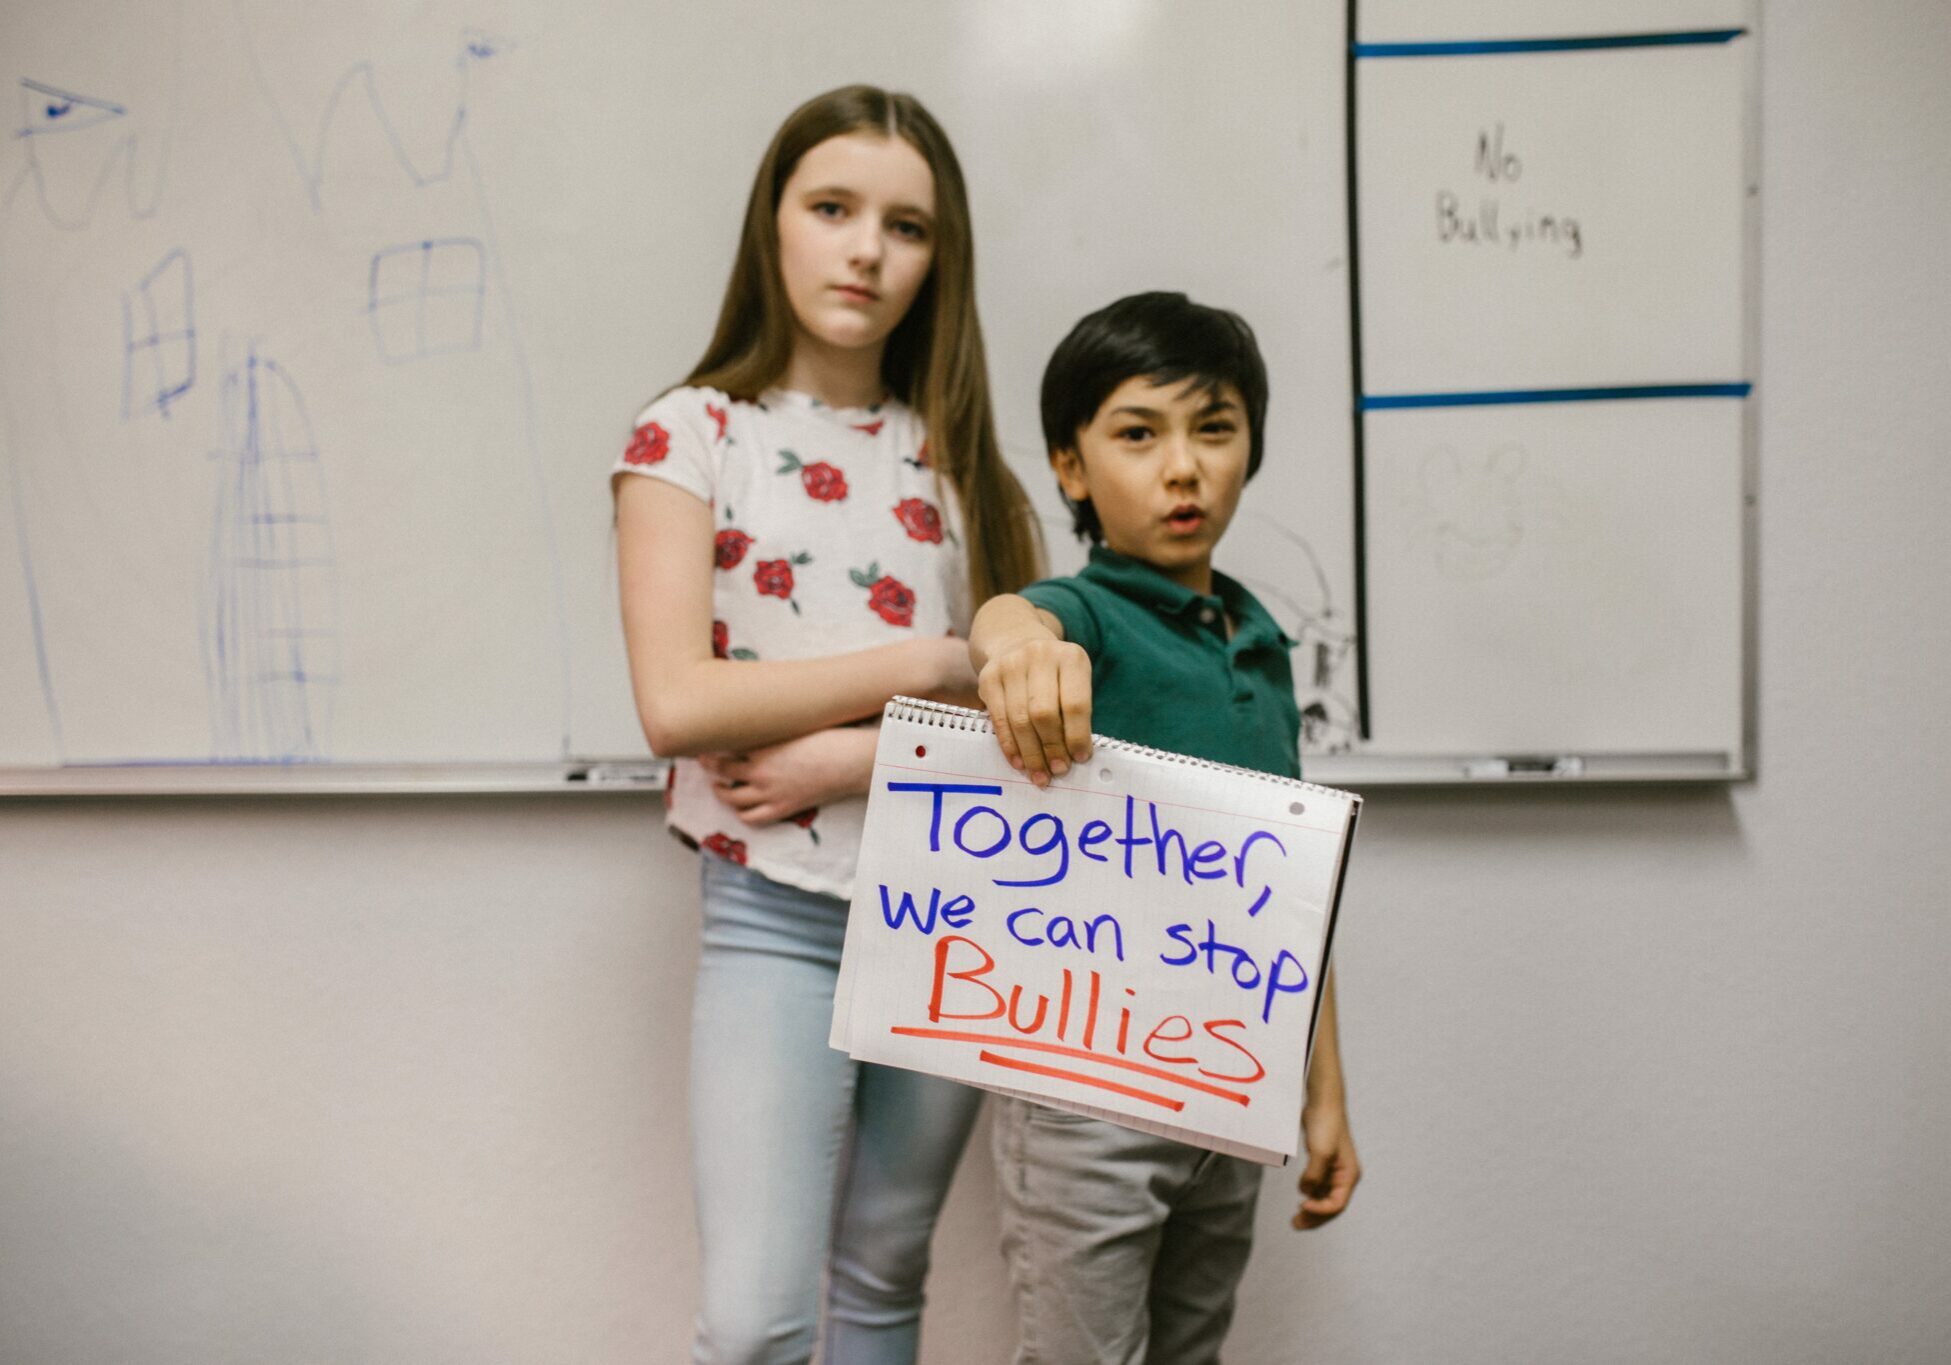 Children-holding-sign-together-we-can-stop-bullies